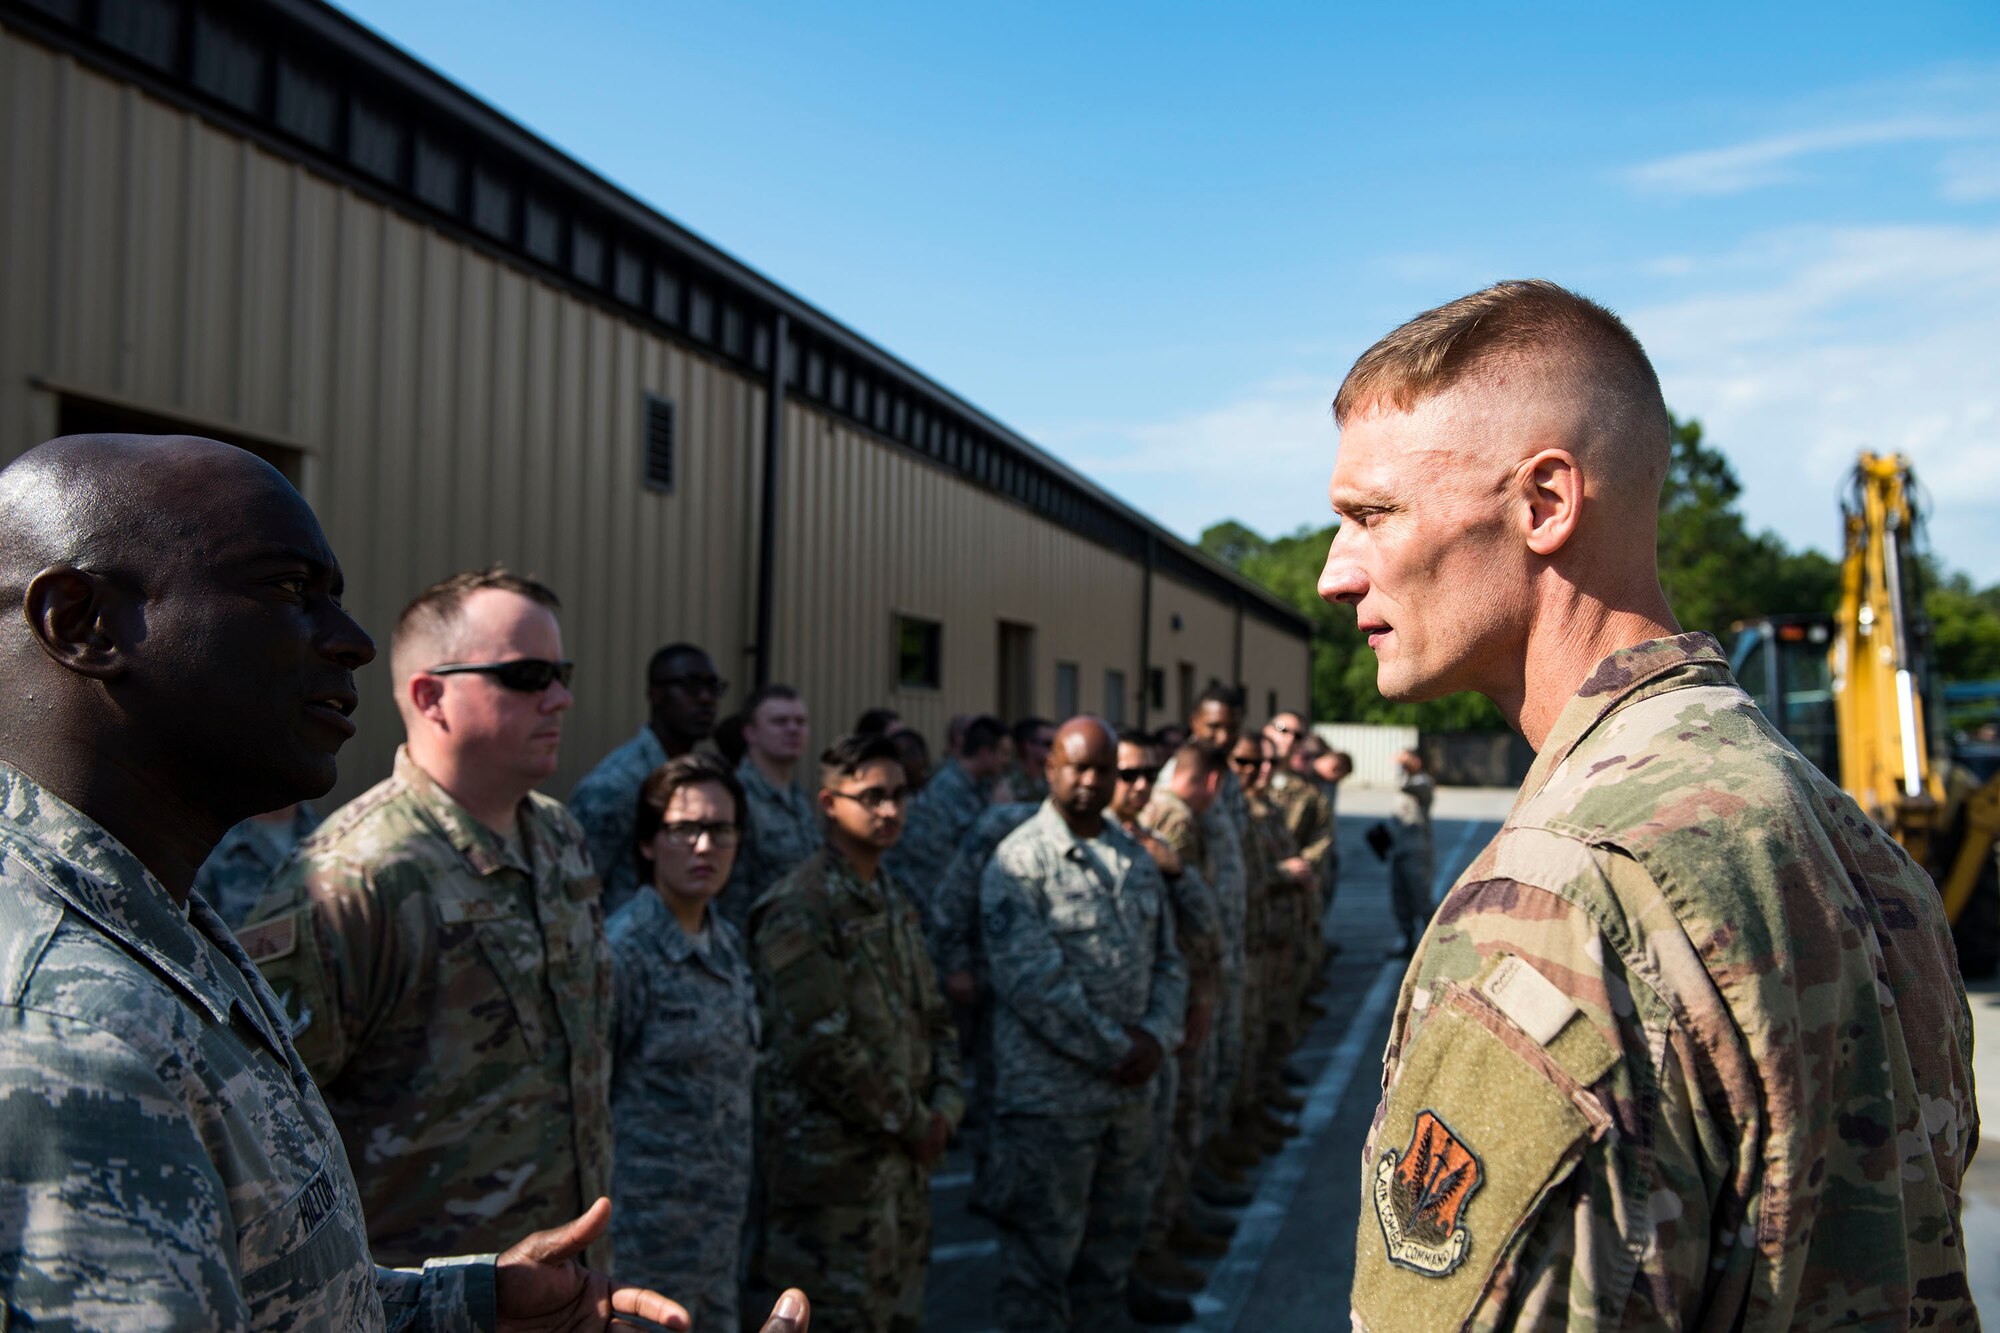 Master Sgt. Brandon Hilton, left, 23d Civil Engineer Squadron (CES) NCO in charge of electrical systems, briefs Col. Dee Jay Katzer, command engineer for Air Combat Command (ACC), during a squadron tour, May 22, 2019, at Moody Air Force Base, Ga. Katzer’s first visit to Moody consisted of a base tour, along with visiting various 23d CES shops. “(The visit) gives Katzer the opportunity to directly interact with the Airmen of the squadron,” said Lt. Col. Michael Francis, 23d CES commander. “He can see what we’re doing to get after our own squadron’s lethality and readiness, and how we enable all of Moody’s missions day in and day out.”  (U.S. Air Force photo by Senior Airman Erick Requadt)